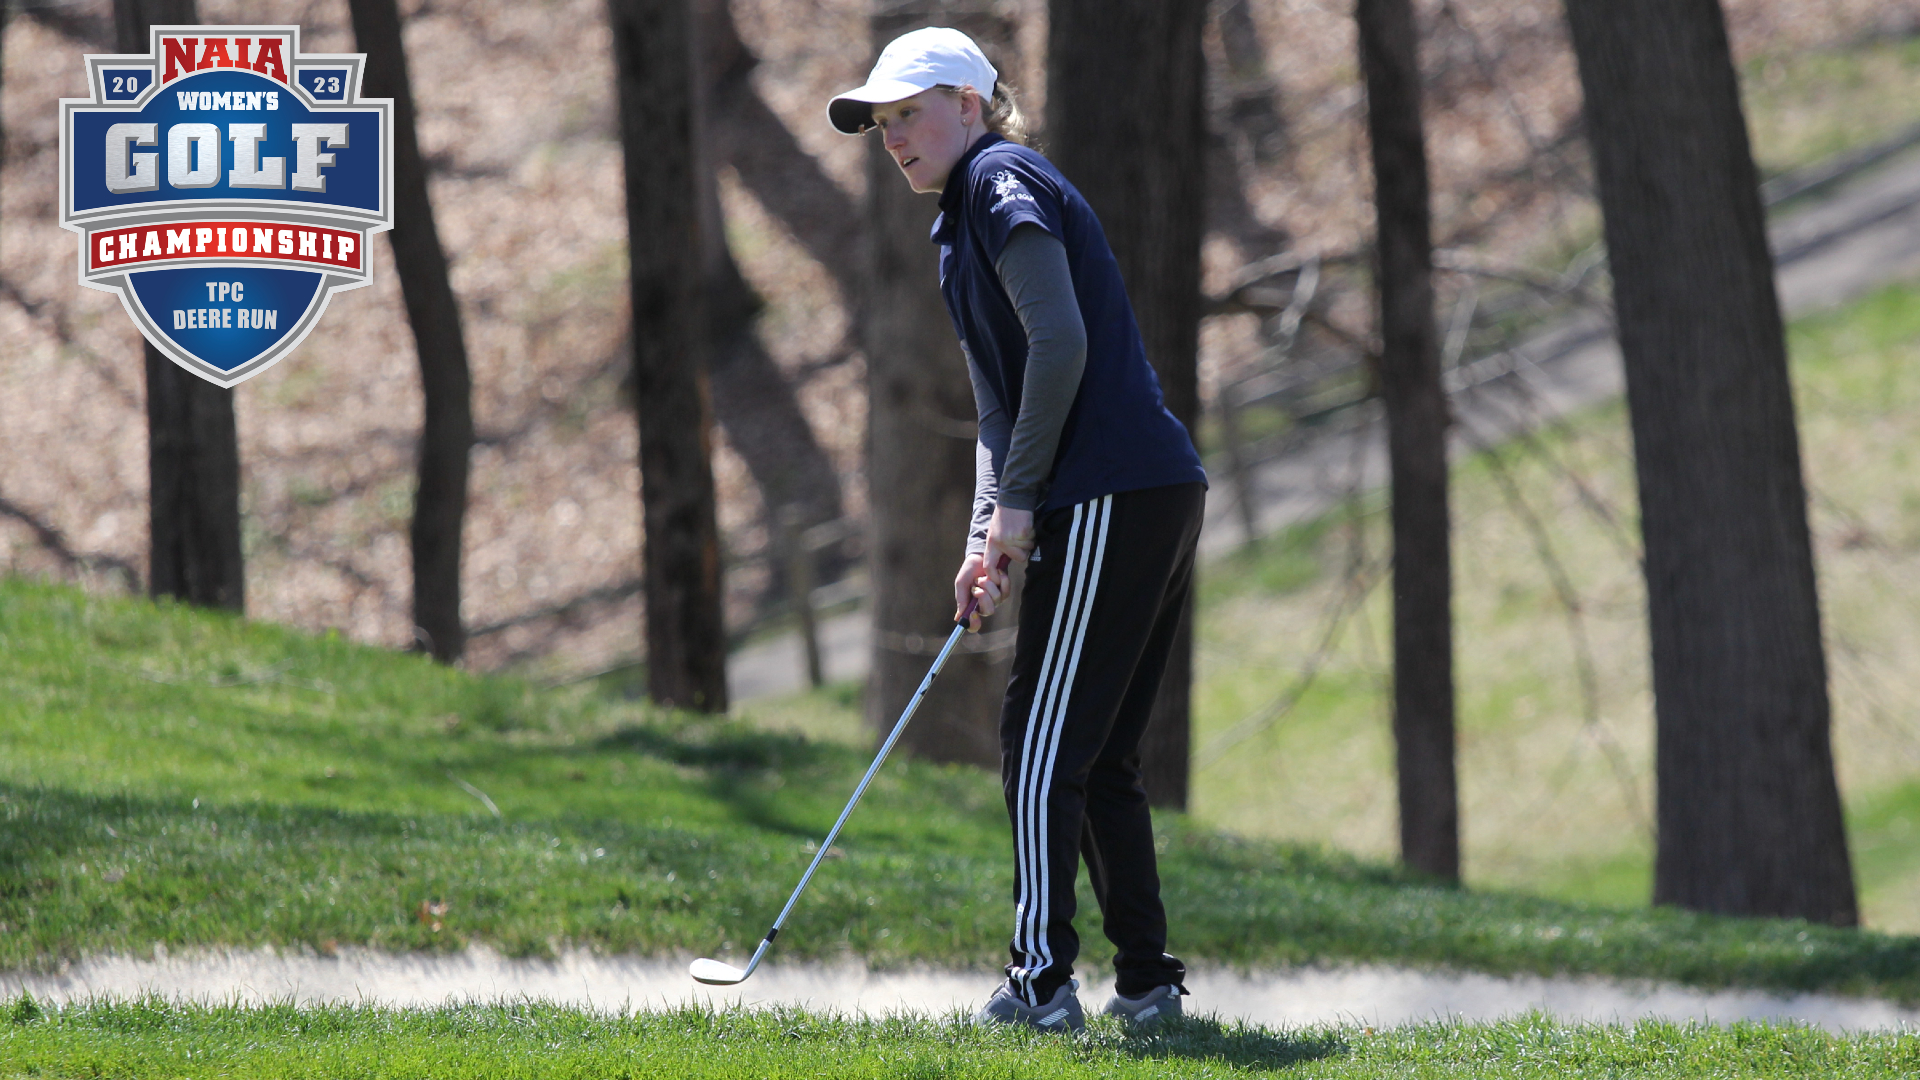 SAU prepares to play host to NAIA Women's Golf Championships